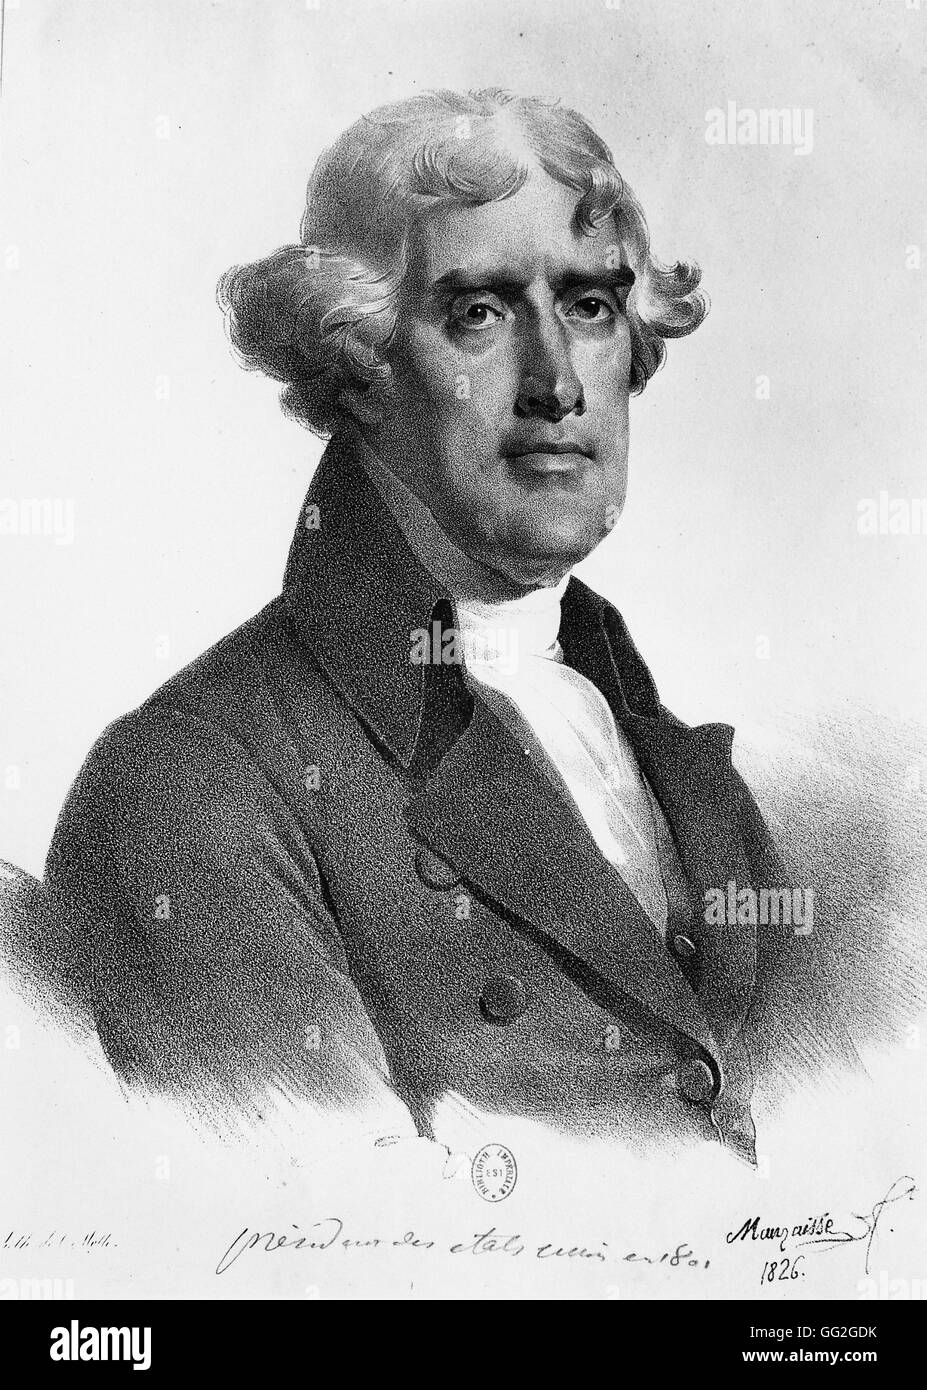 Mauraisse French school Portrait of Thomas Jefferson, President of the United States of America from 1801 to 1809. 1826 Lithograph Stock Photo